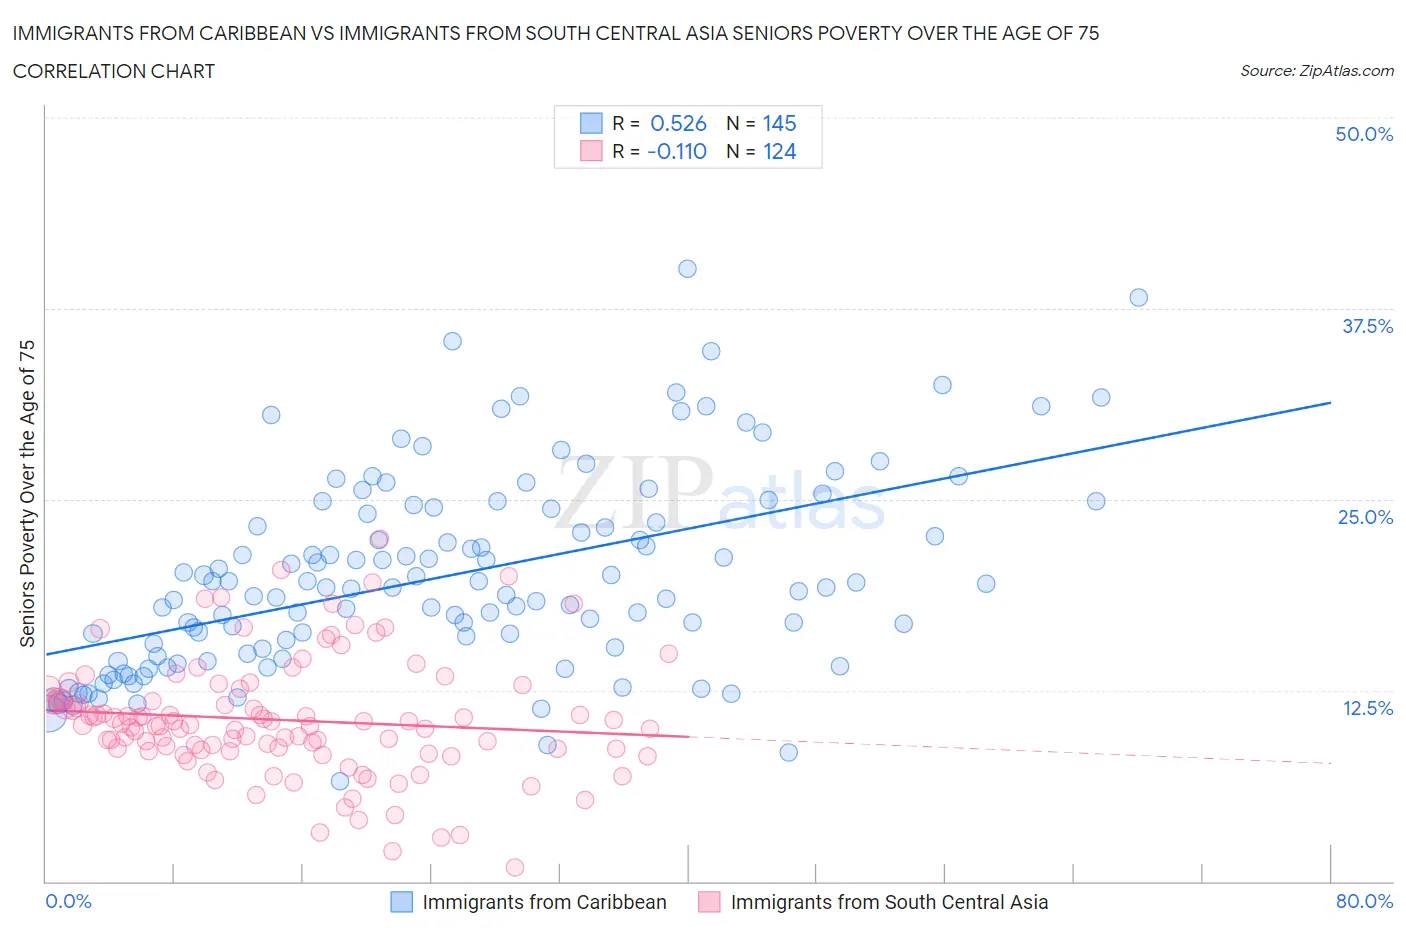 Immigrants from Caribbean vs Immigrants from South Central Asia Seniors Poverty Over the Age of 75